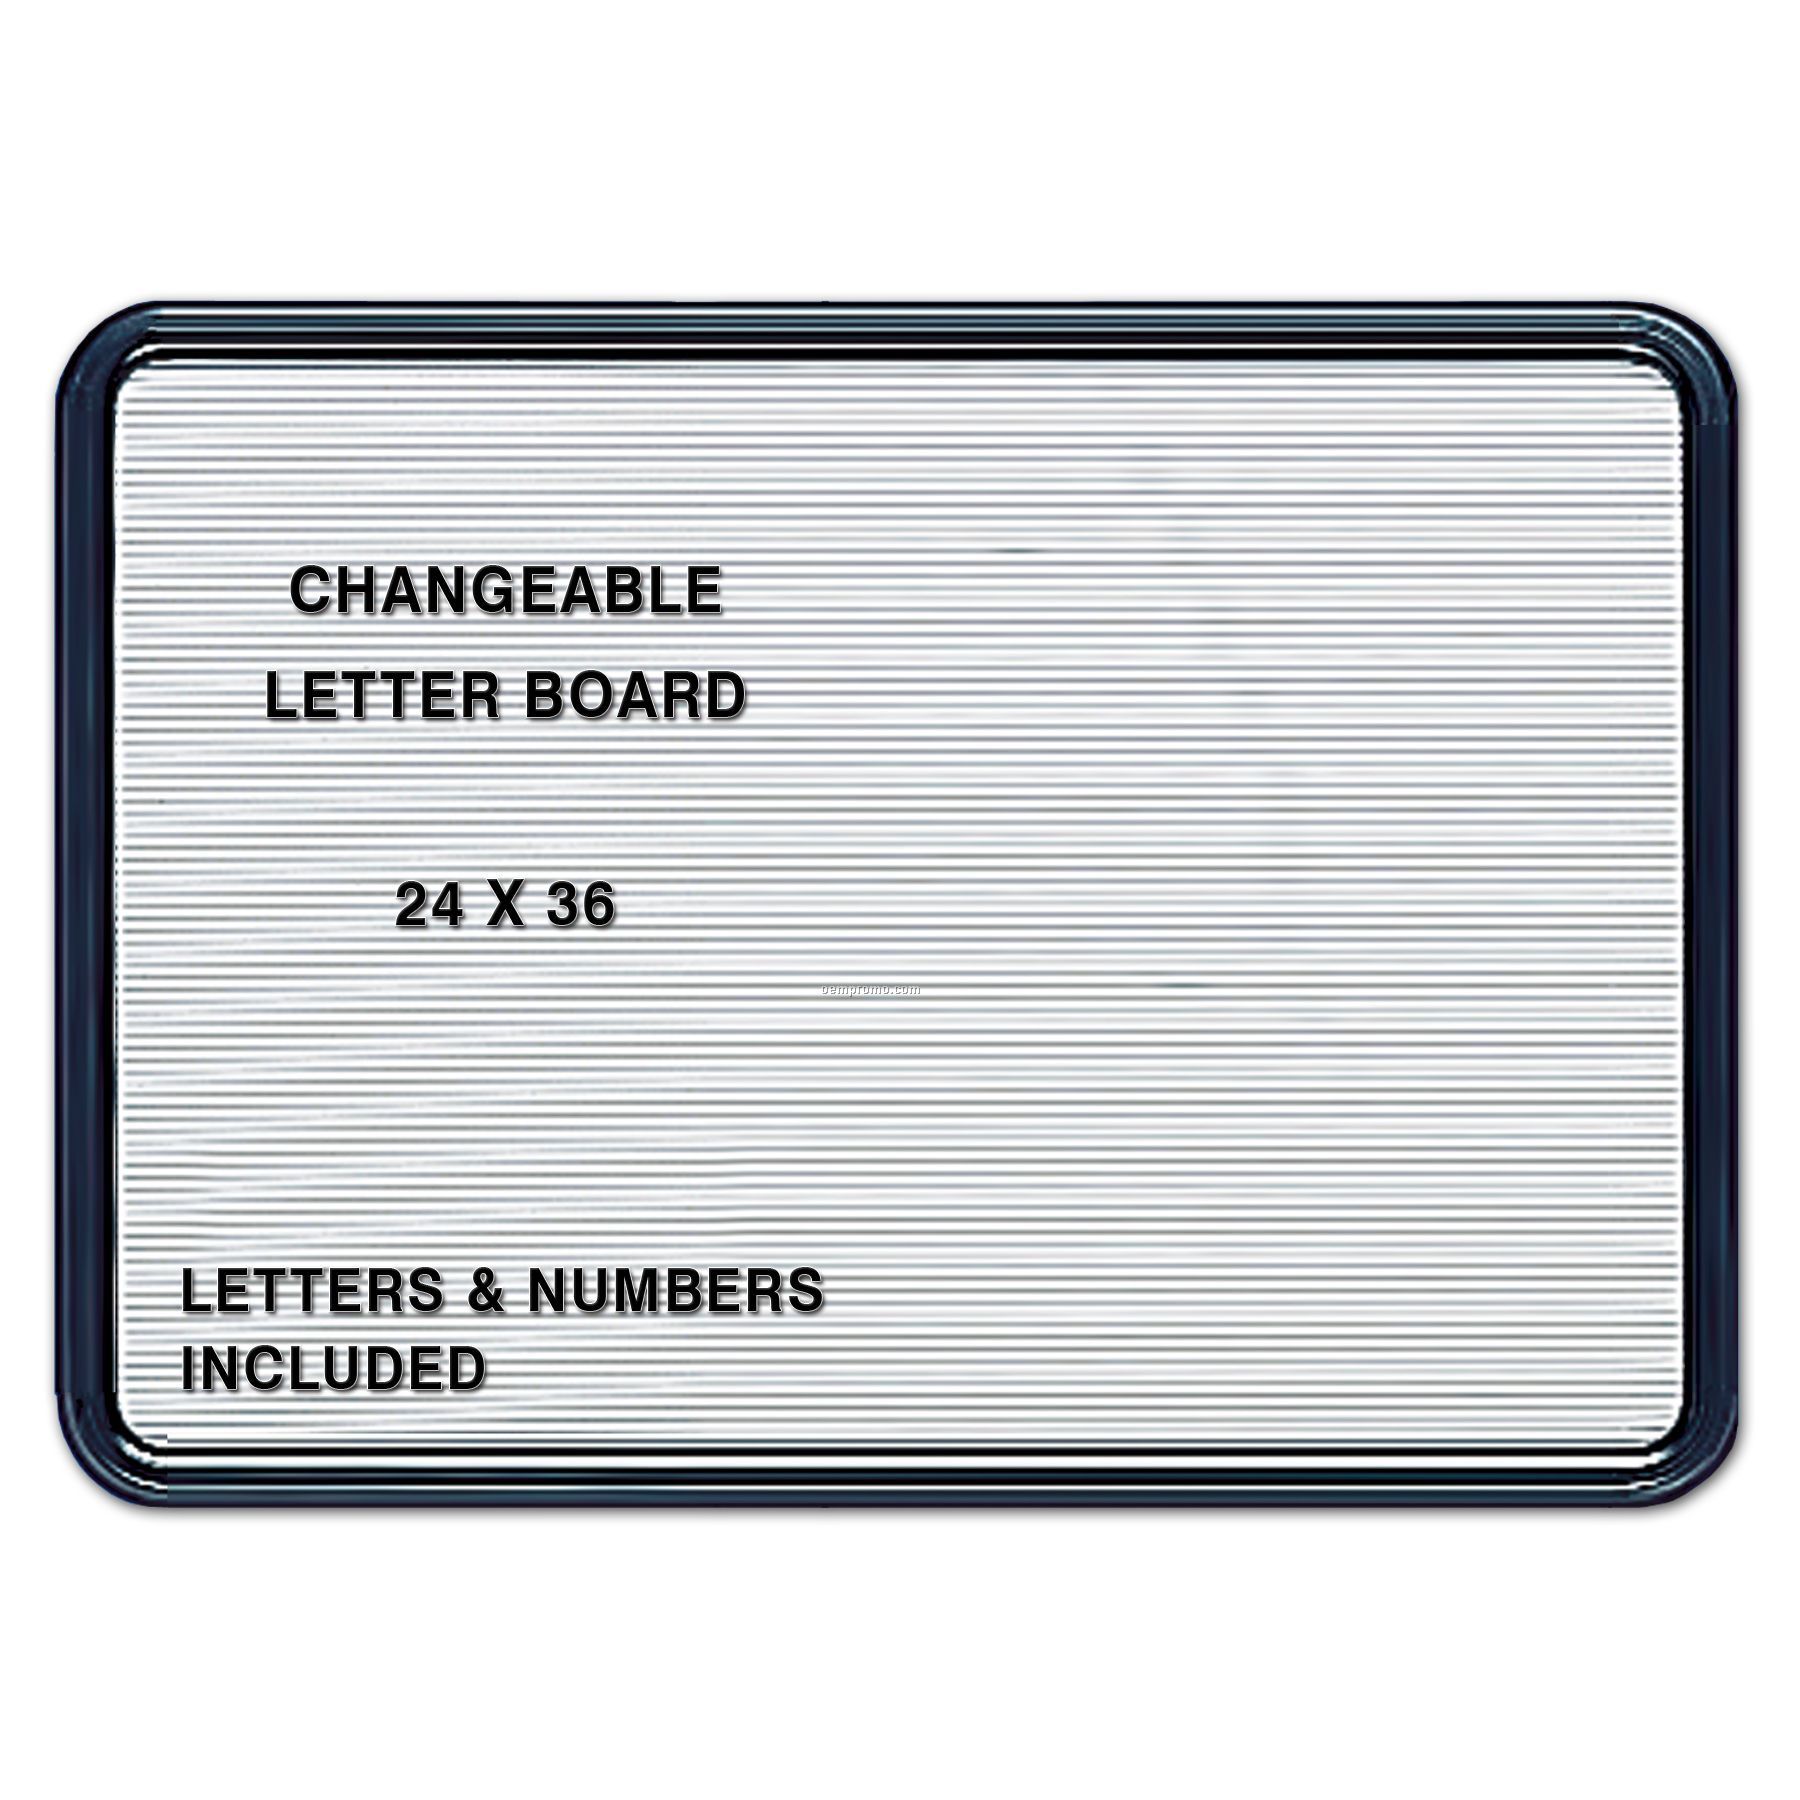 Changeable Letter Board 36"W X 24"H Black Frame With White Letter Panel